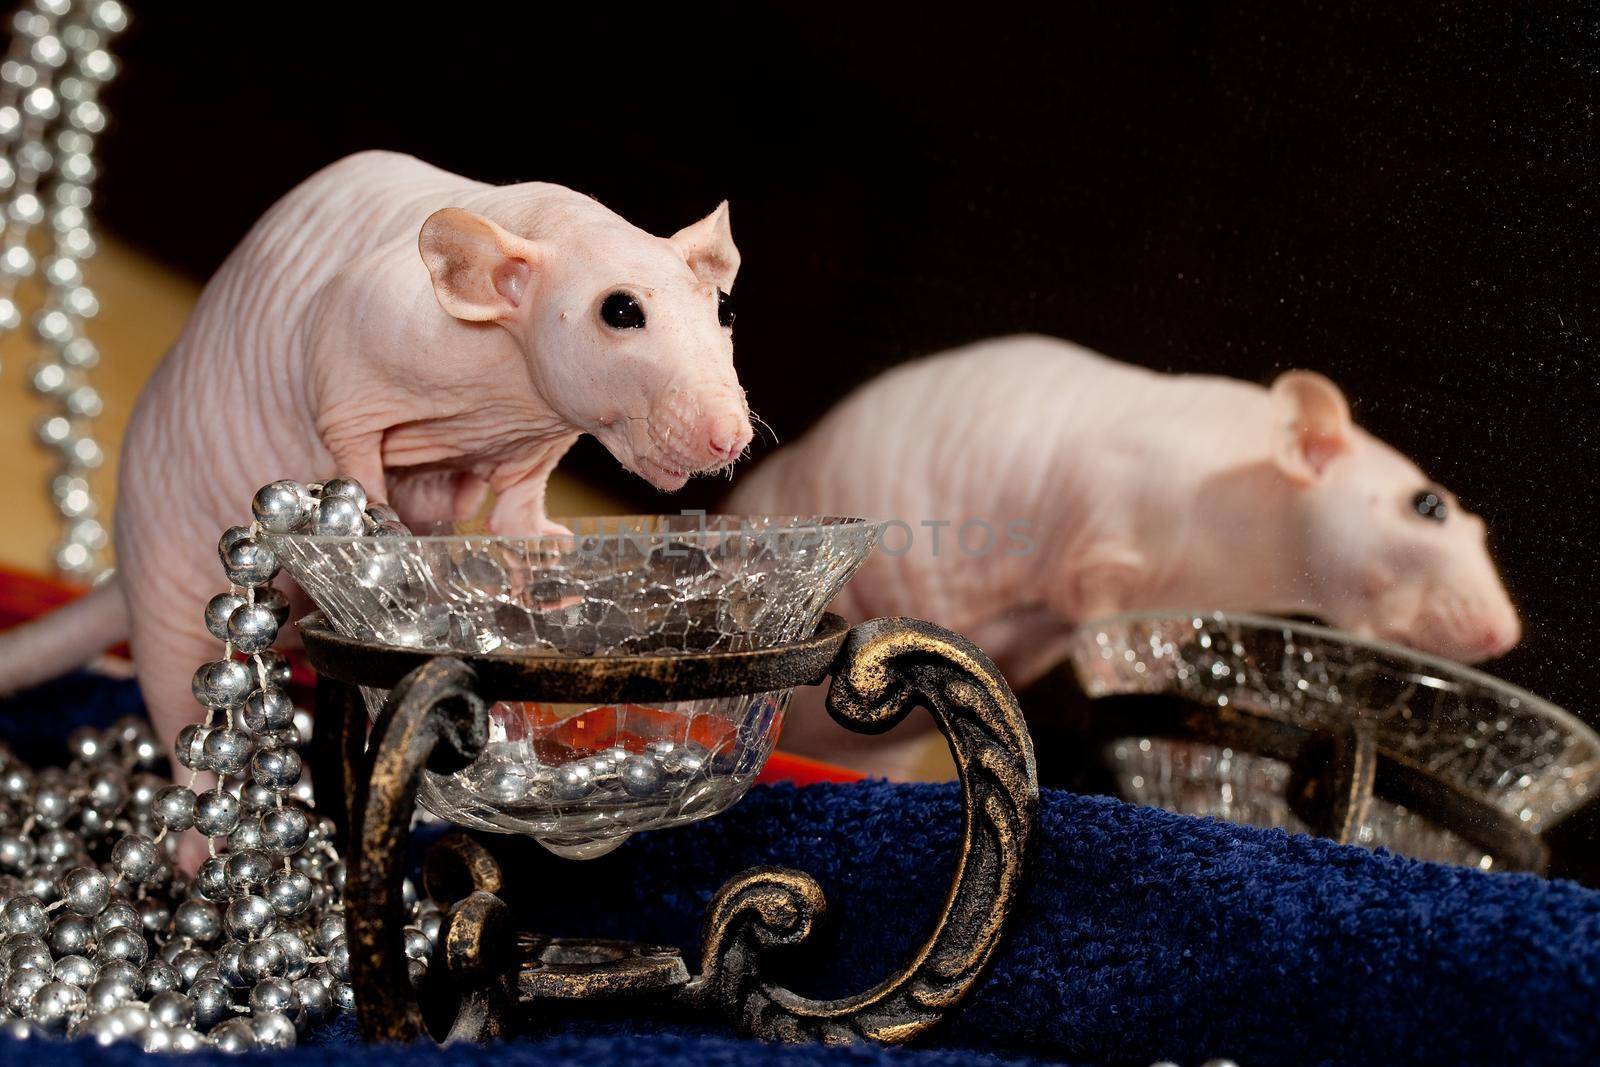 Rat, necklace and mirror by Lincikas